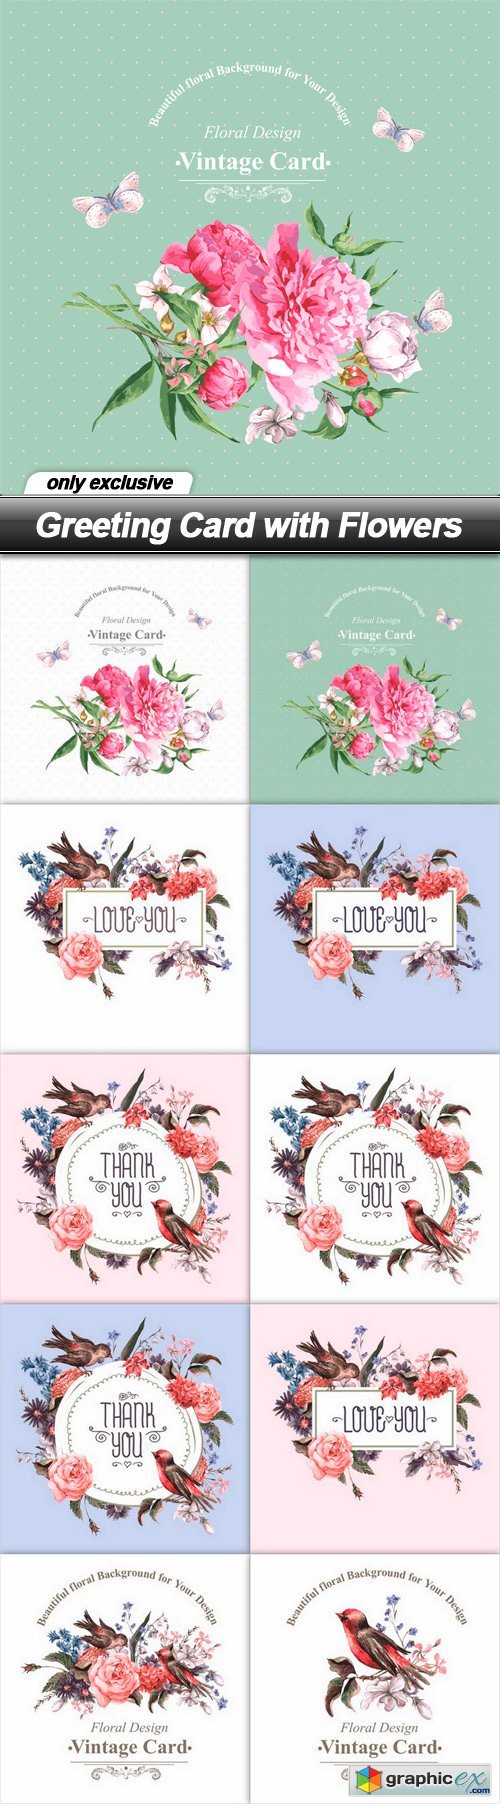 Greeting Card with Flowers - 10 EPS